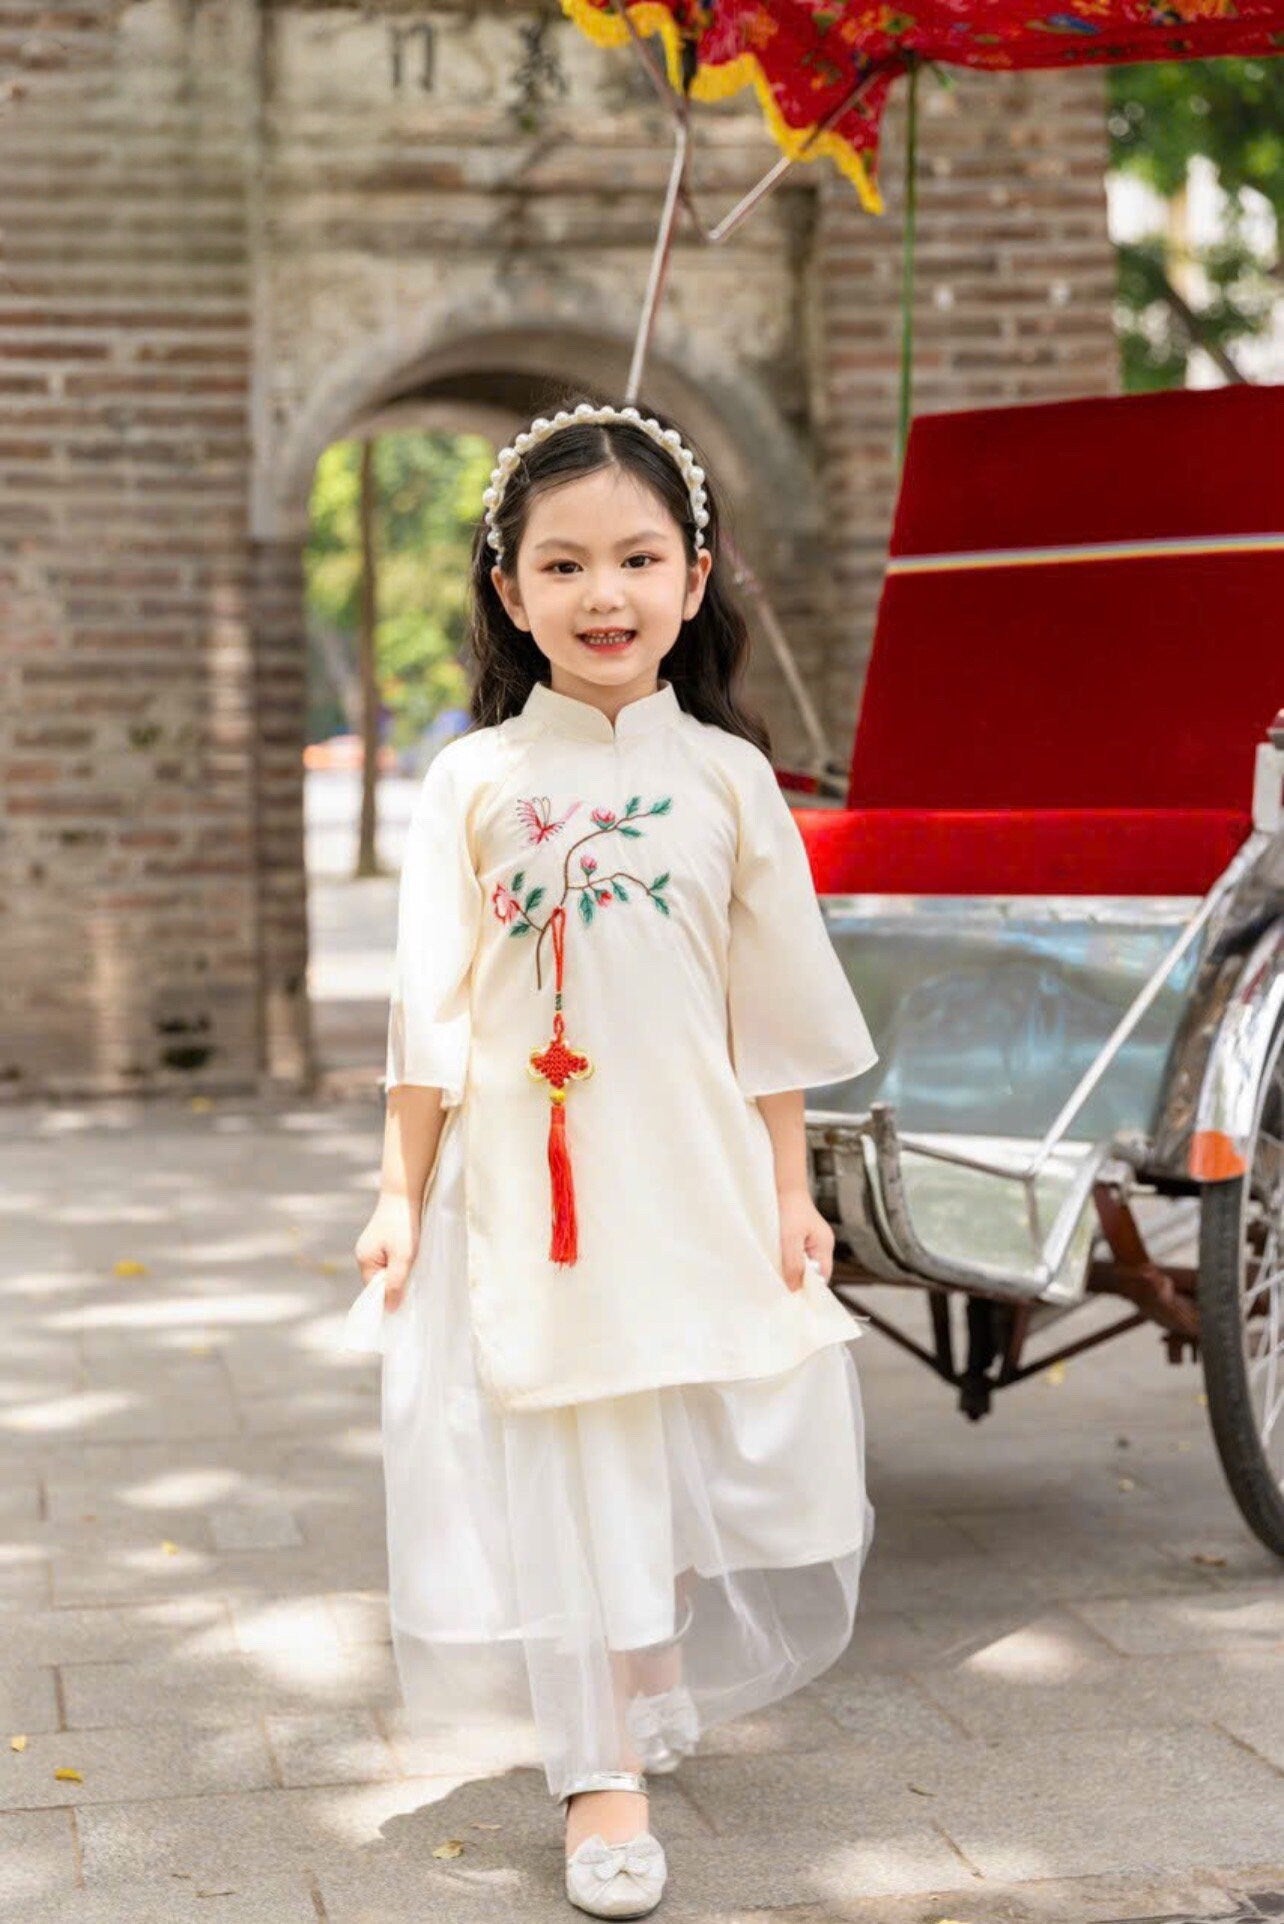 Mom and Daughter Embroidery Ao Dai Set